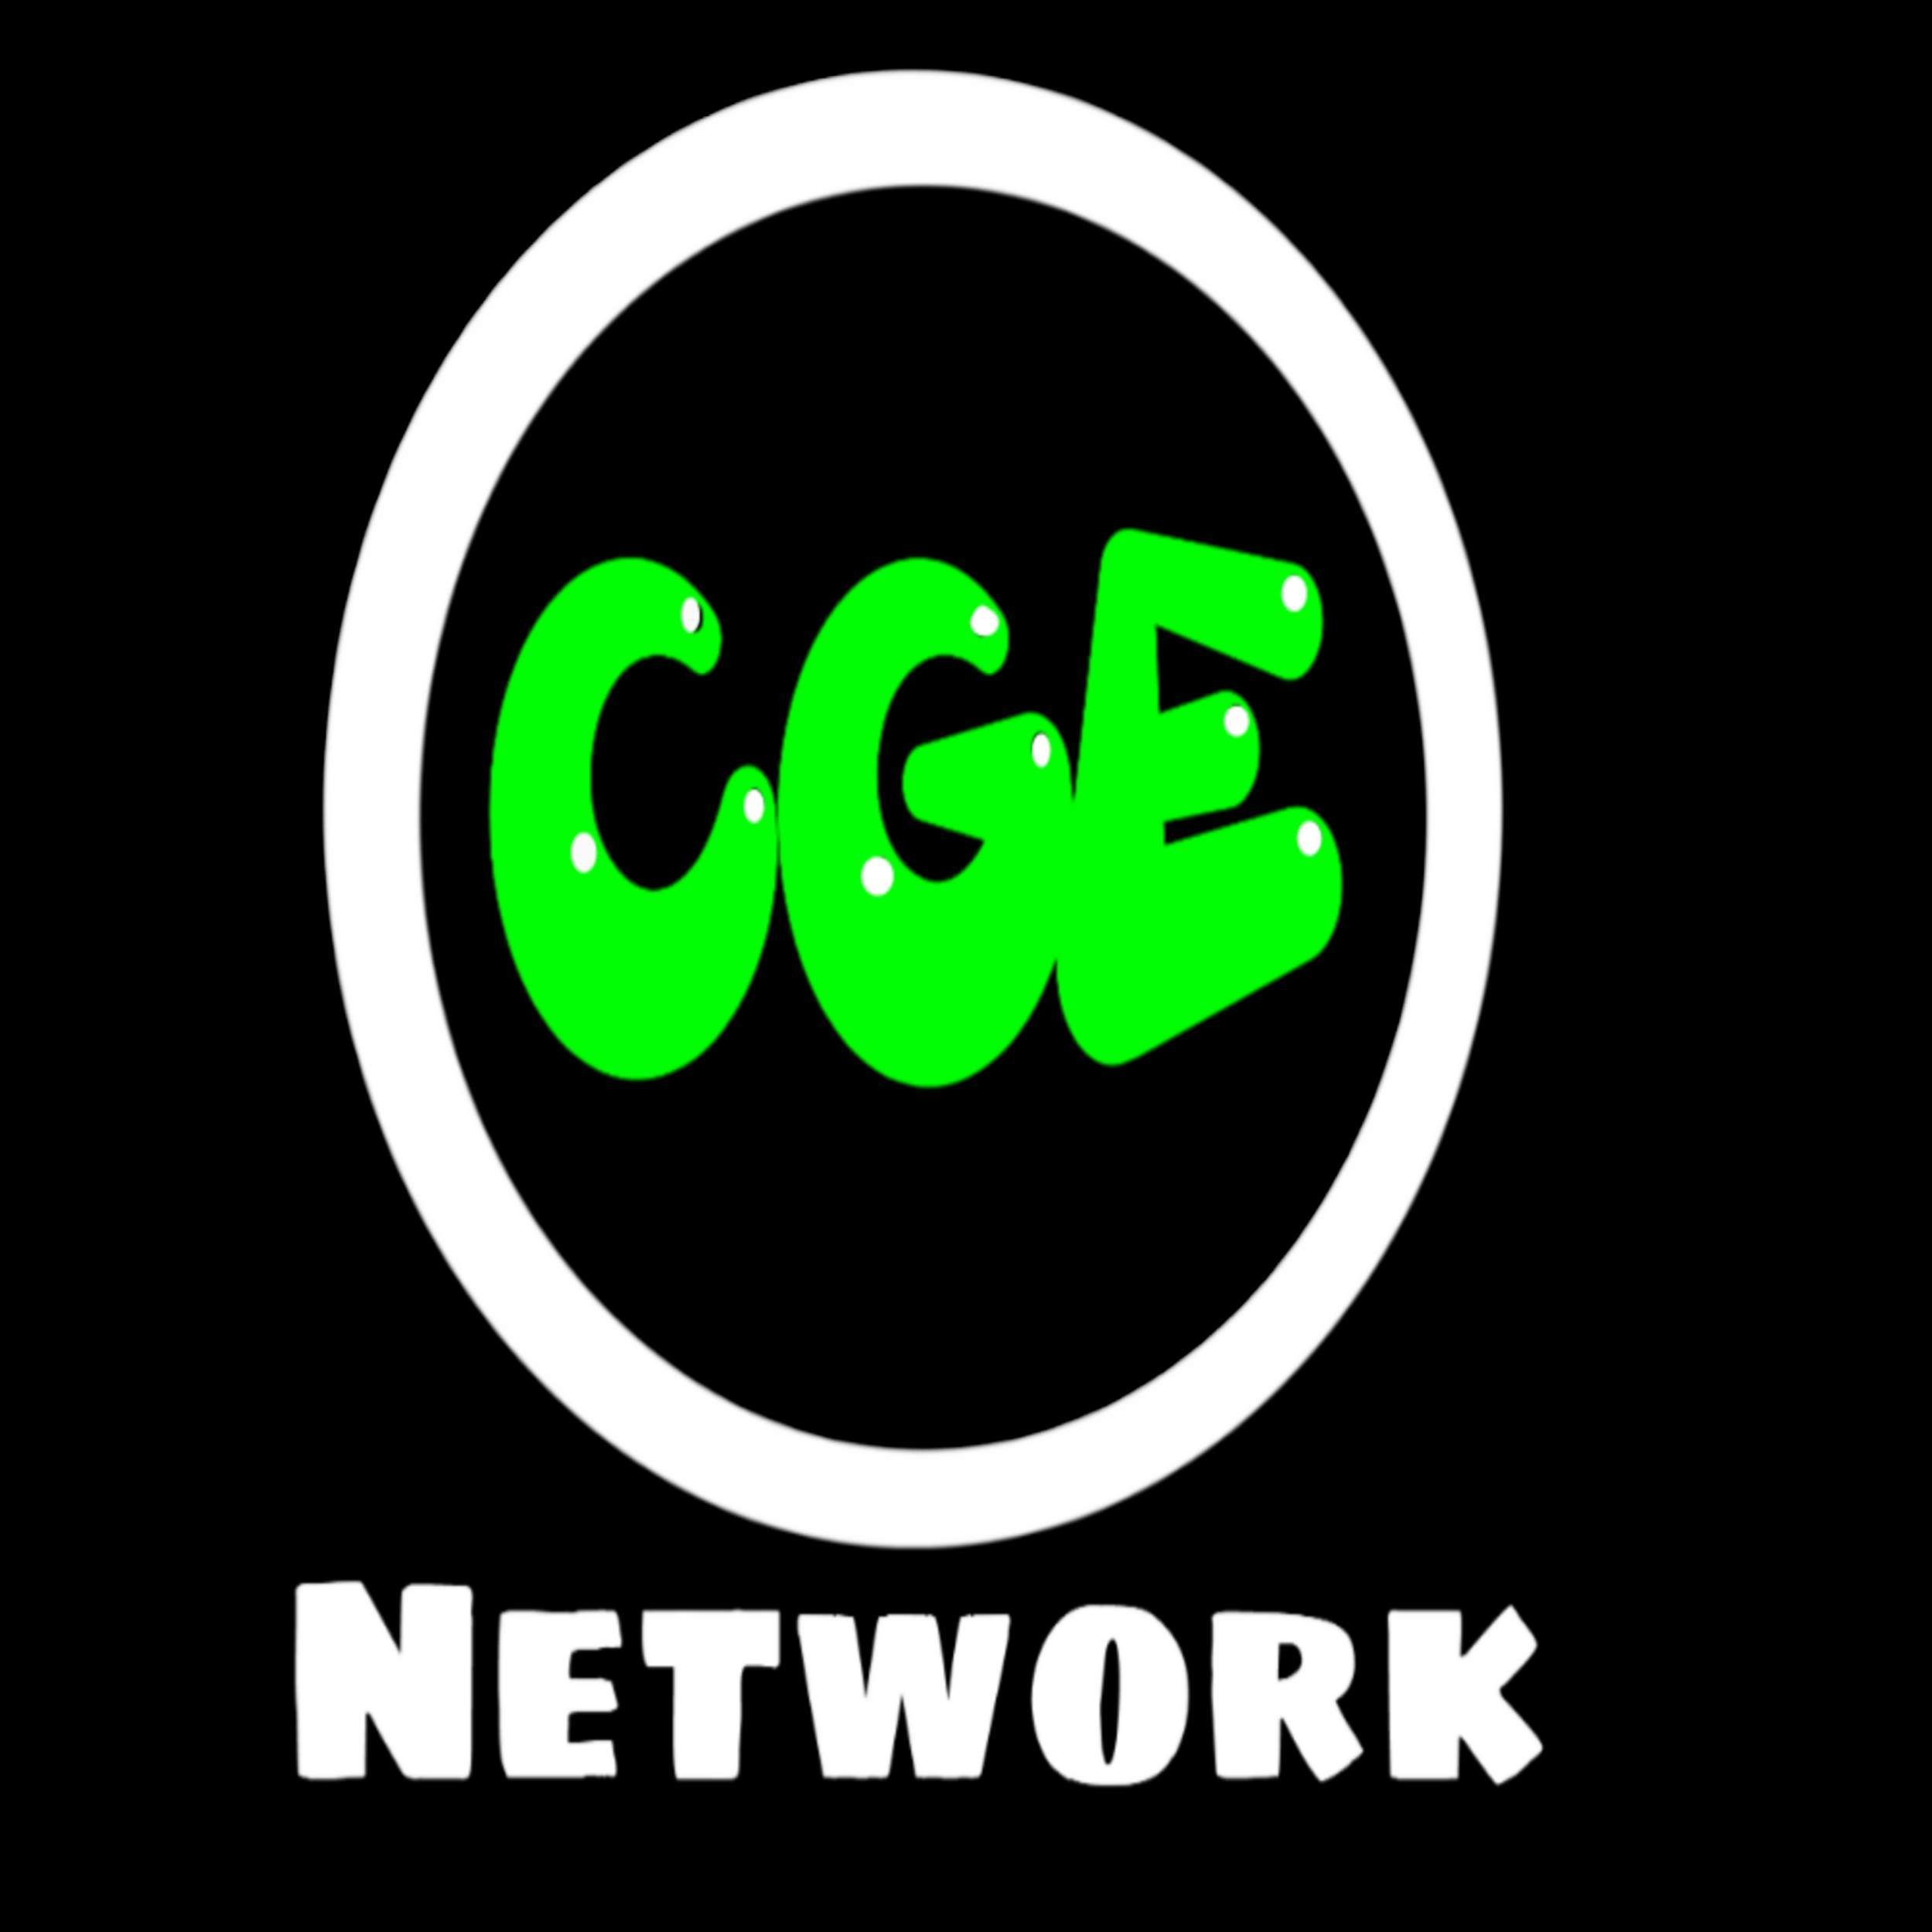 CGE NETWORK